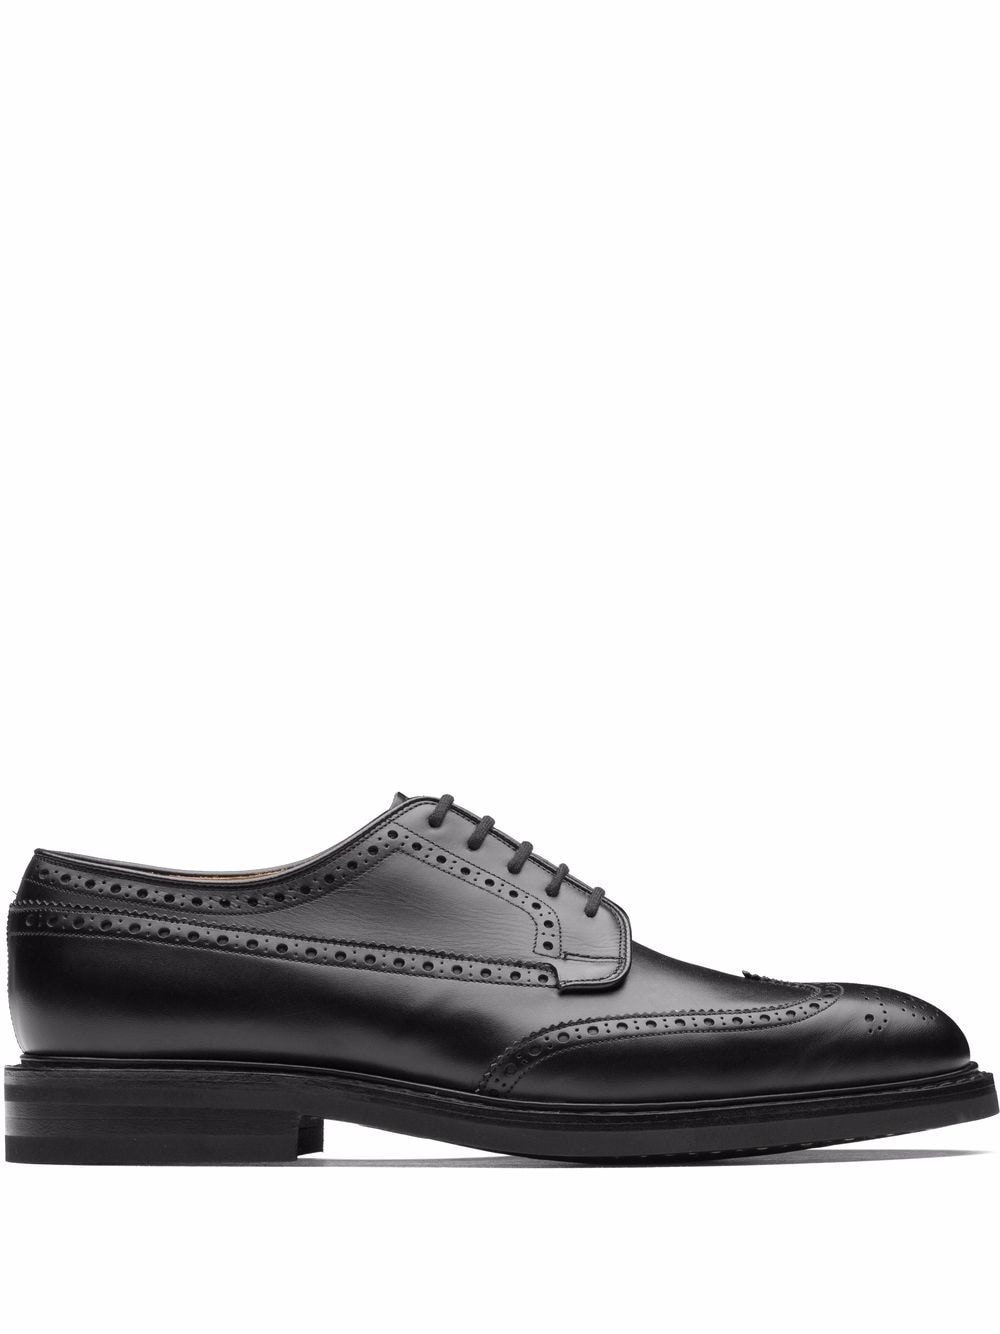 Image 1 of Church's Grafton R LW calf leather derby brogues